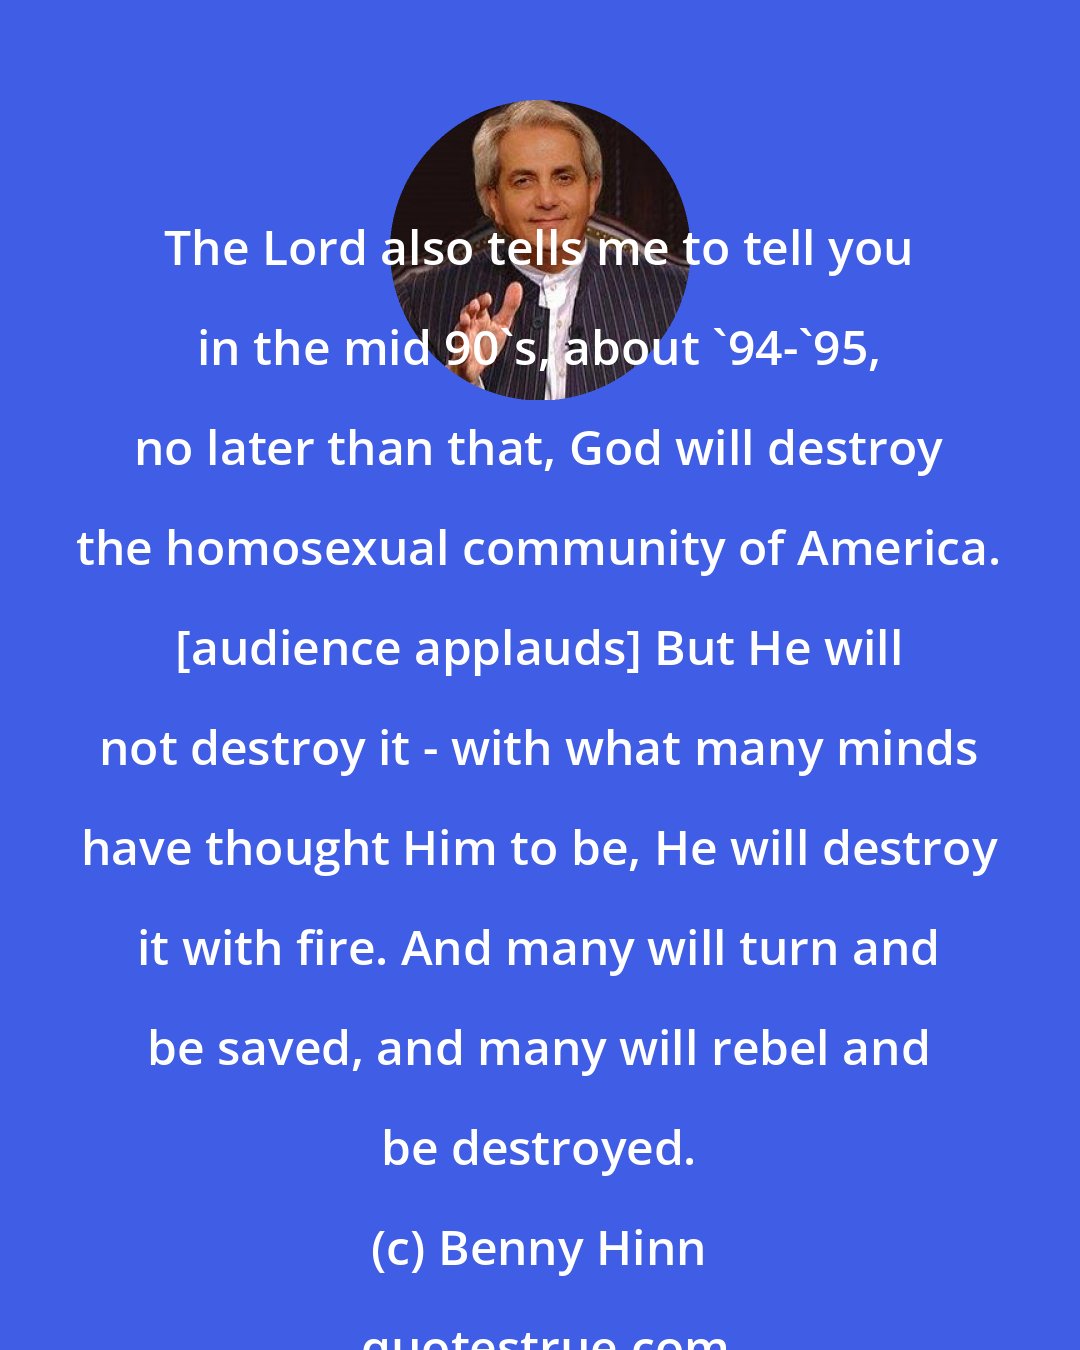 Benny Hinn: The Lord also tells me to tell you in the mid 90's, about '94-'95, no later than that, God will destroy the homosexual community of America. [audience applauds] But He will not destroy it - with what many minds have thought Him to be, He will destroy it with fire. And many will turn and be saved, and many will rebel and be destroyed.